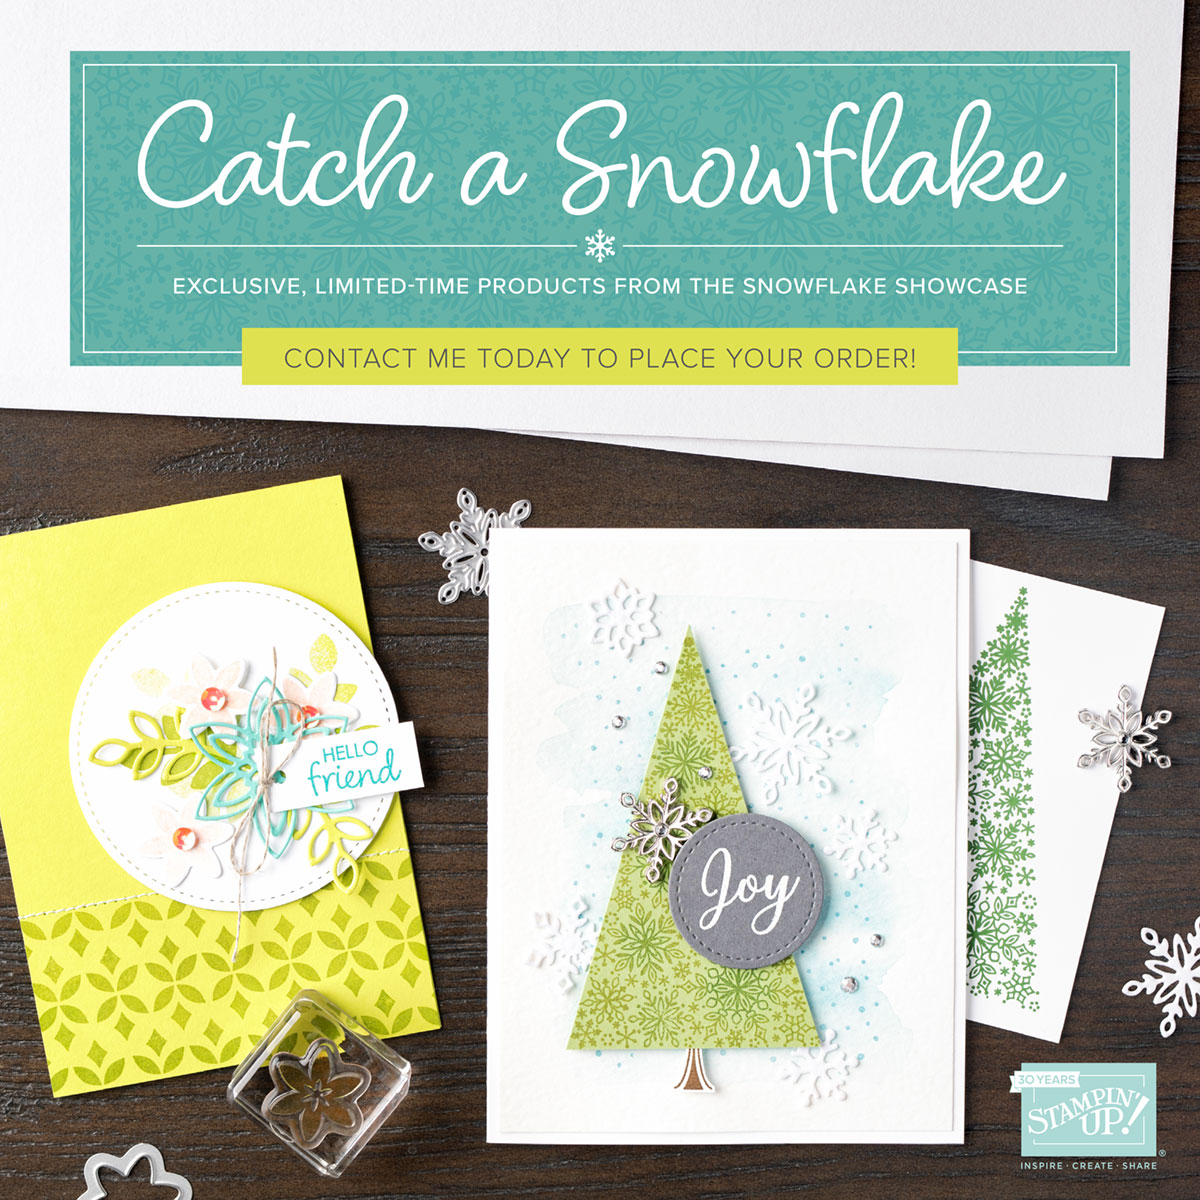 Snowflake Showcase products - COMING SOON